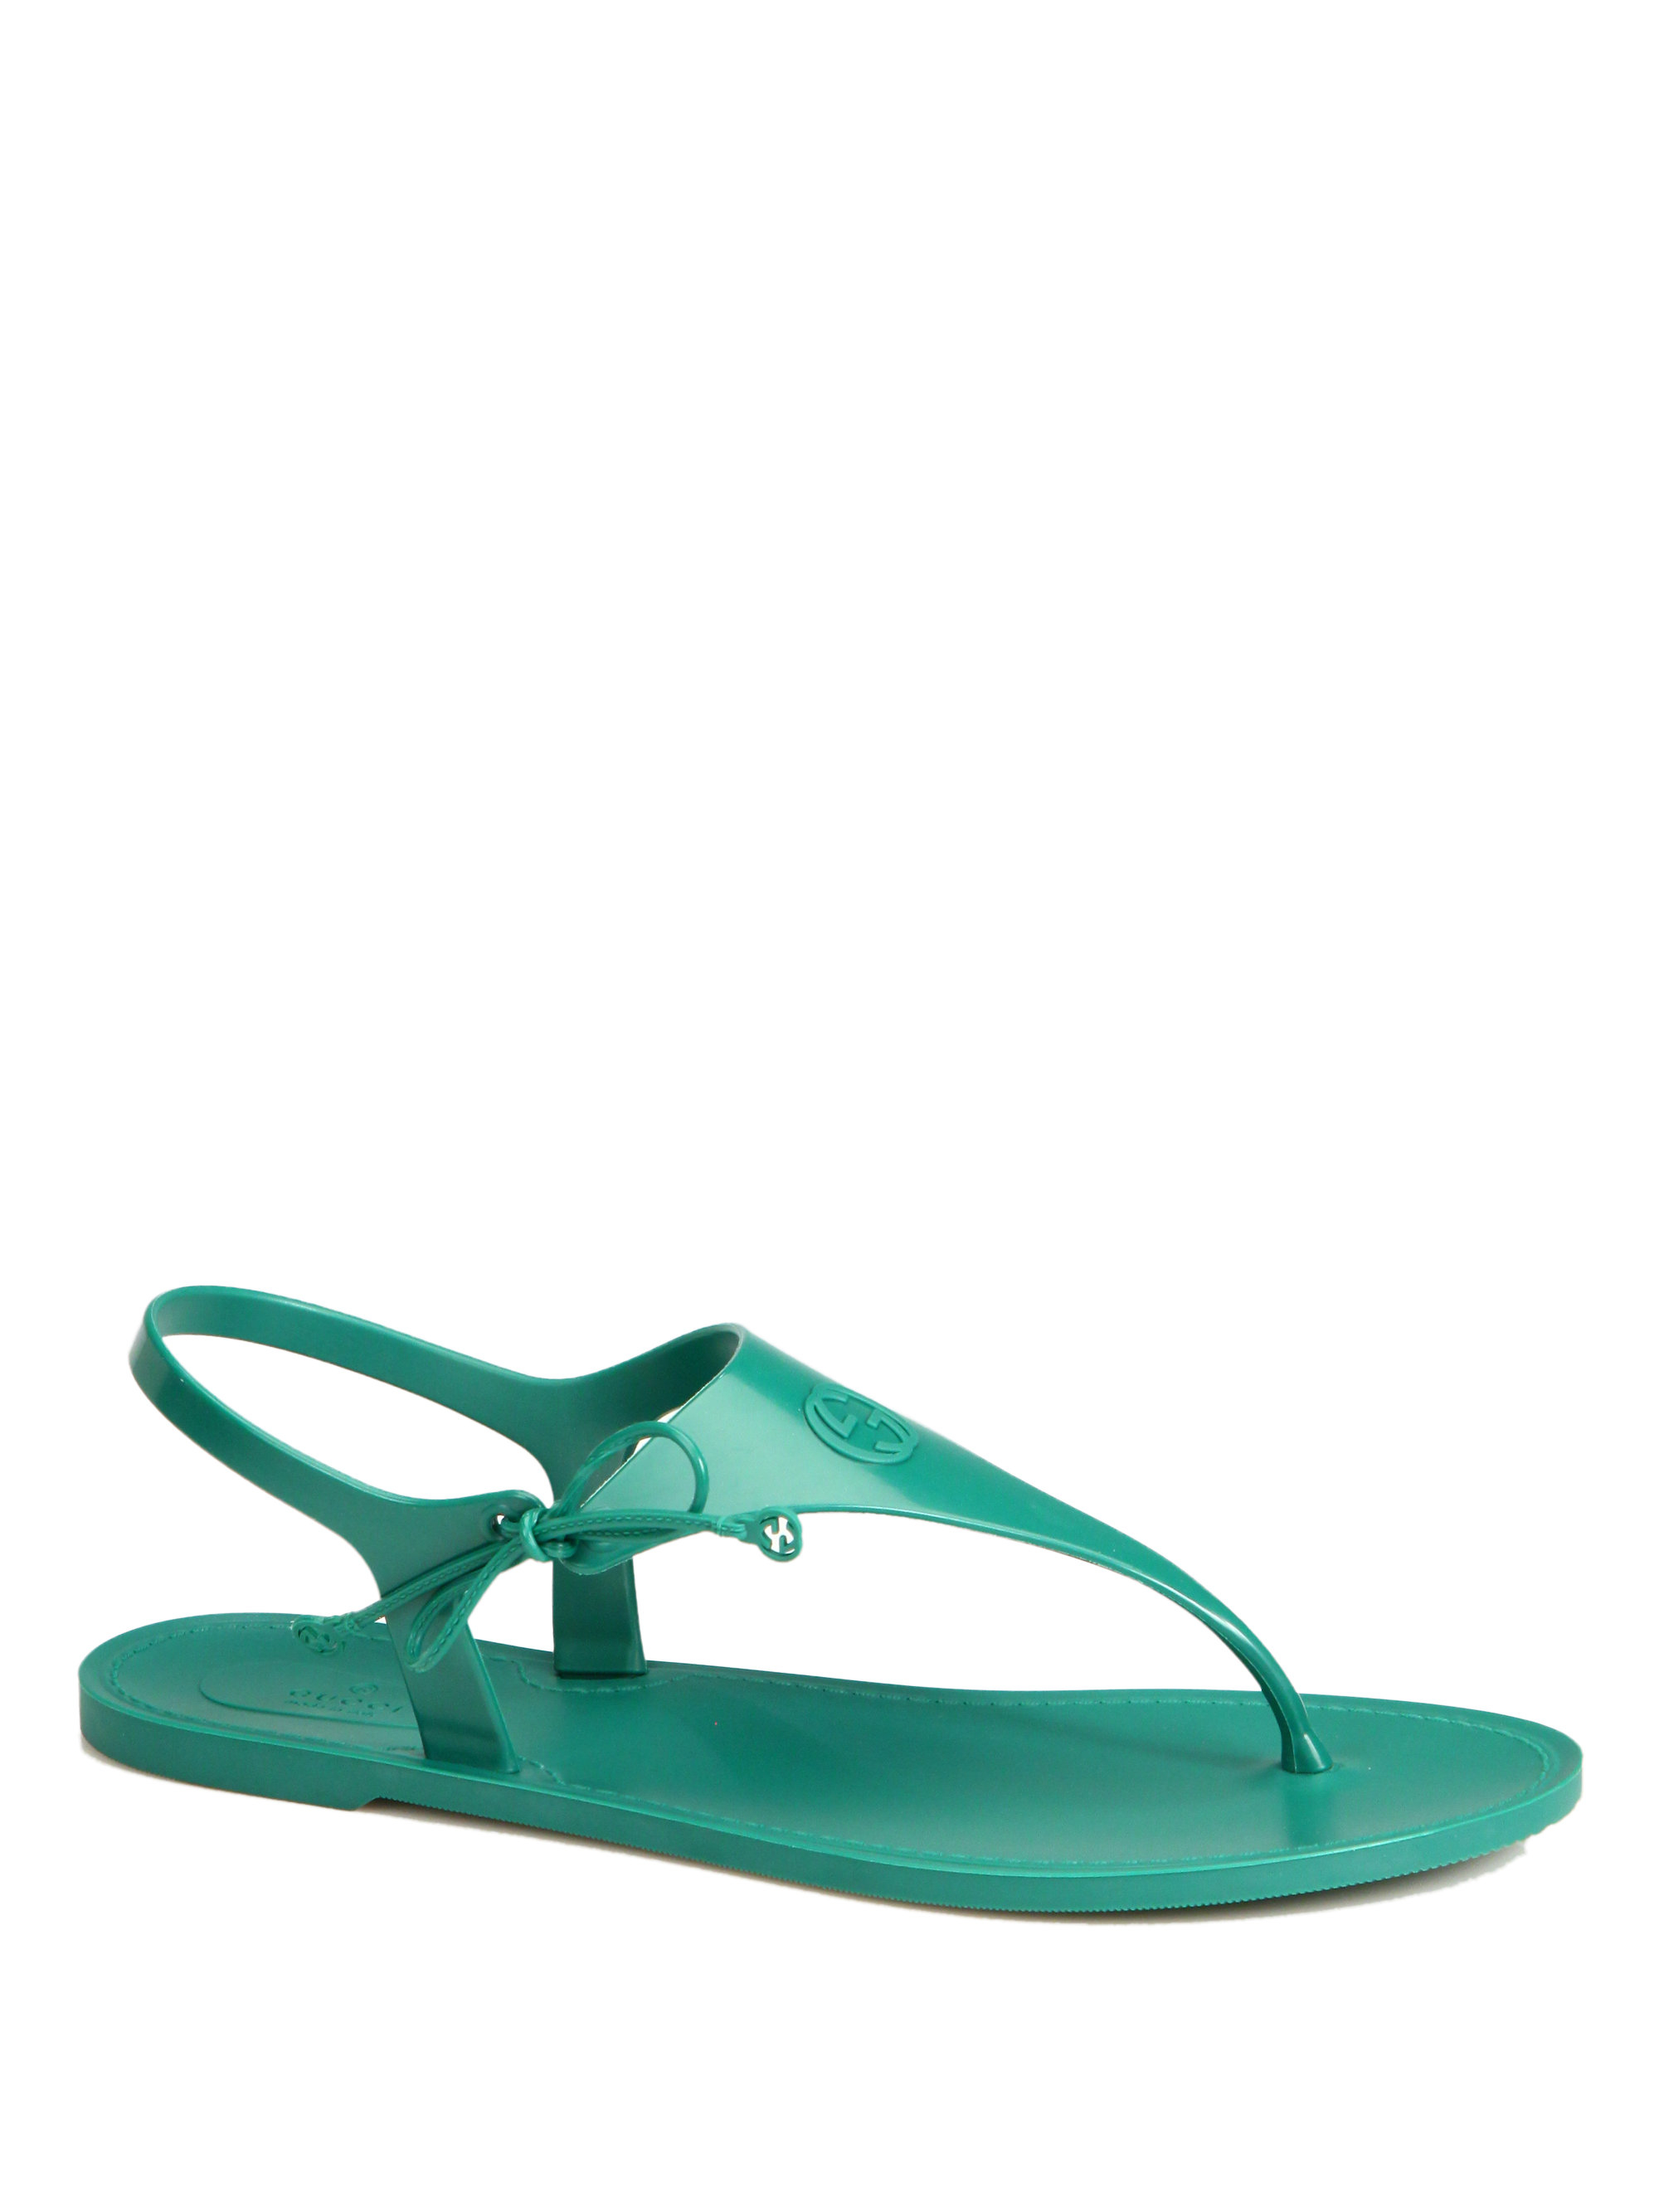 Gucci Katina Rubber Thong Sandals in Black | Lyst